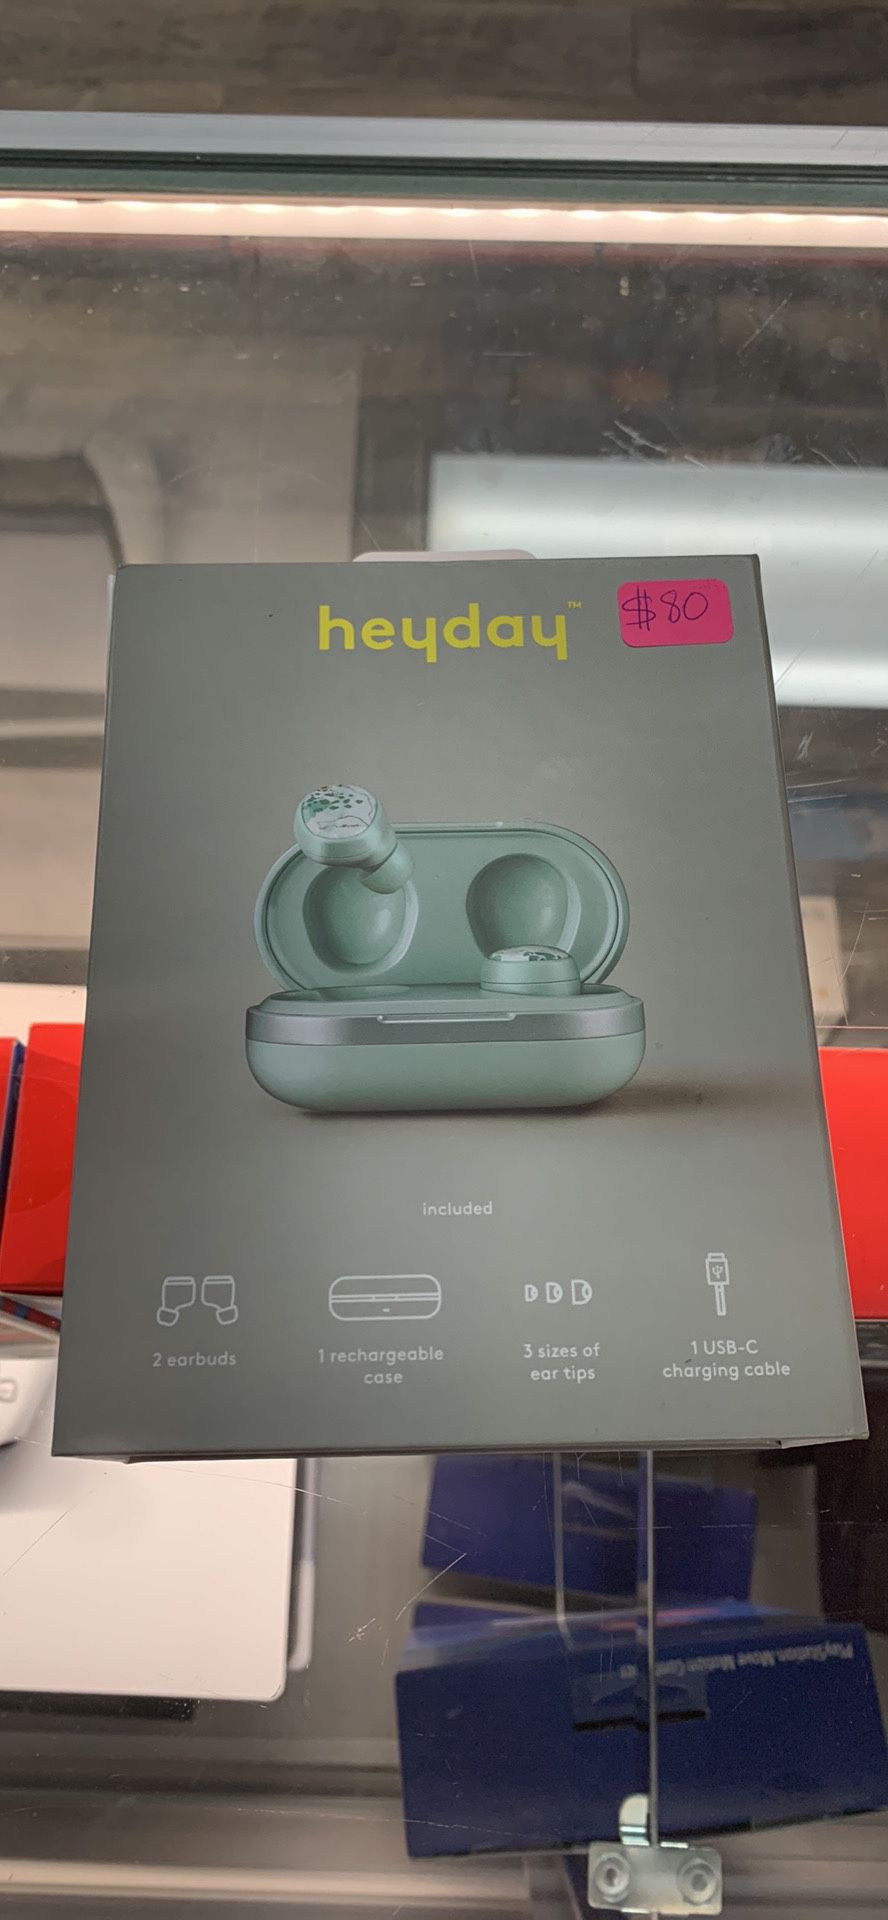 Heyday Active Noise Canceling True Wireless Bluetooth Earbuds